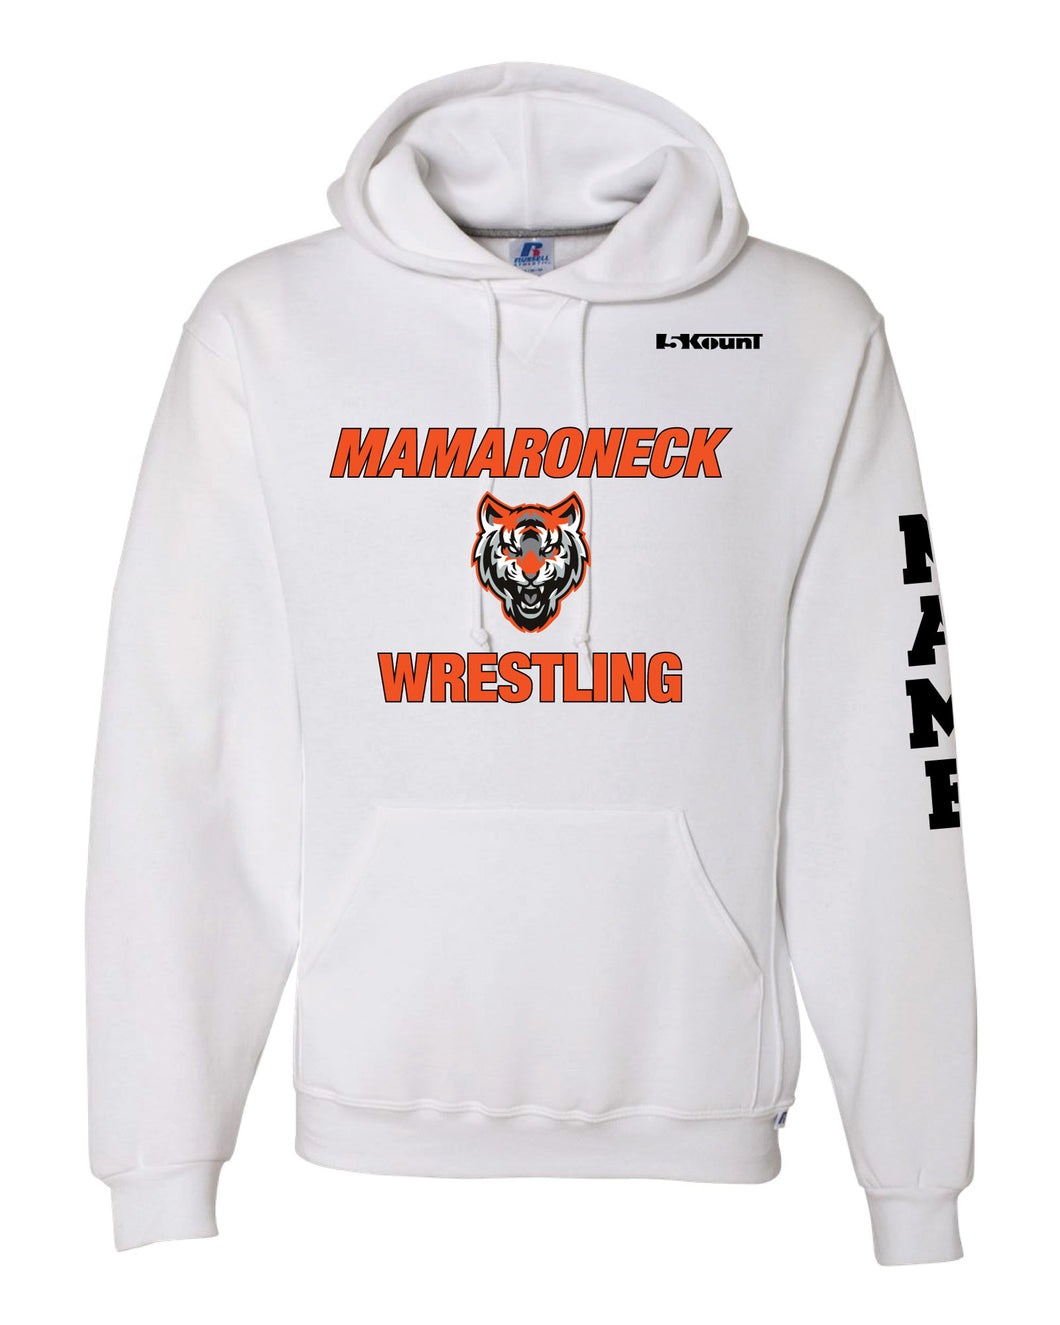 Mamaroneck Wrestling Russell Athletic Cotton Hoodie - White - 5KounT2018